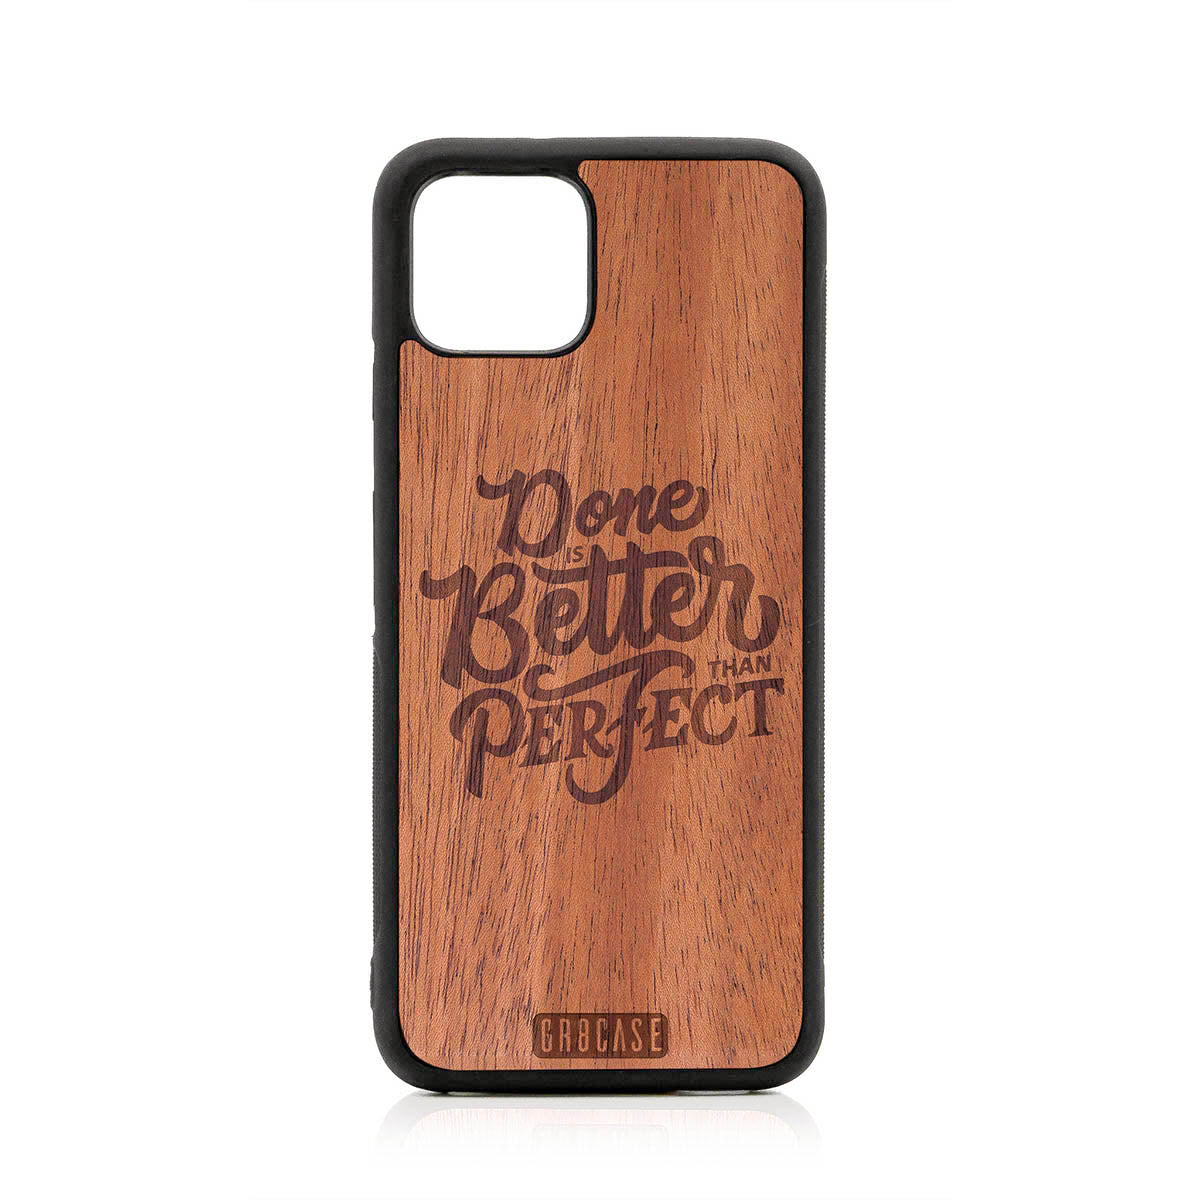 Done Is Better Than Perfect Design Wood Case For Google Pixel 4 by GR8CASE